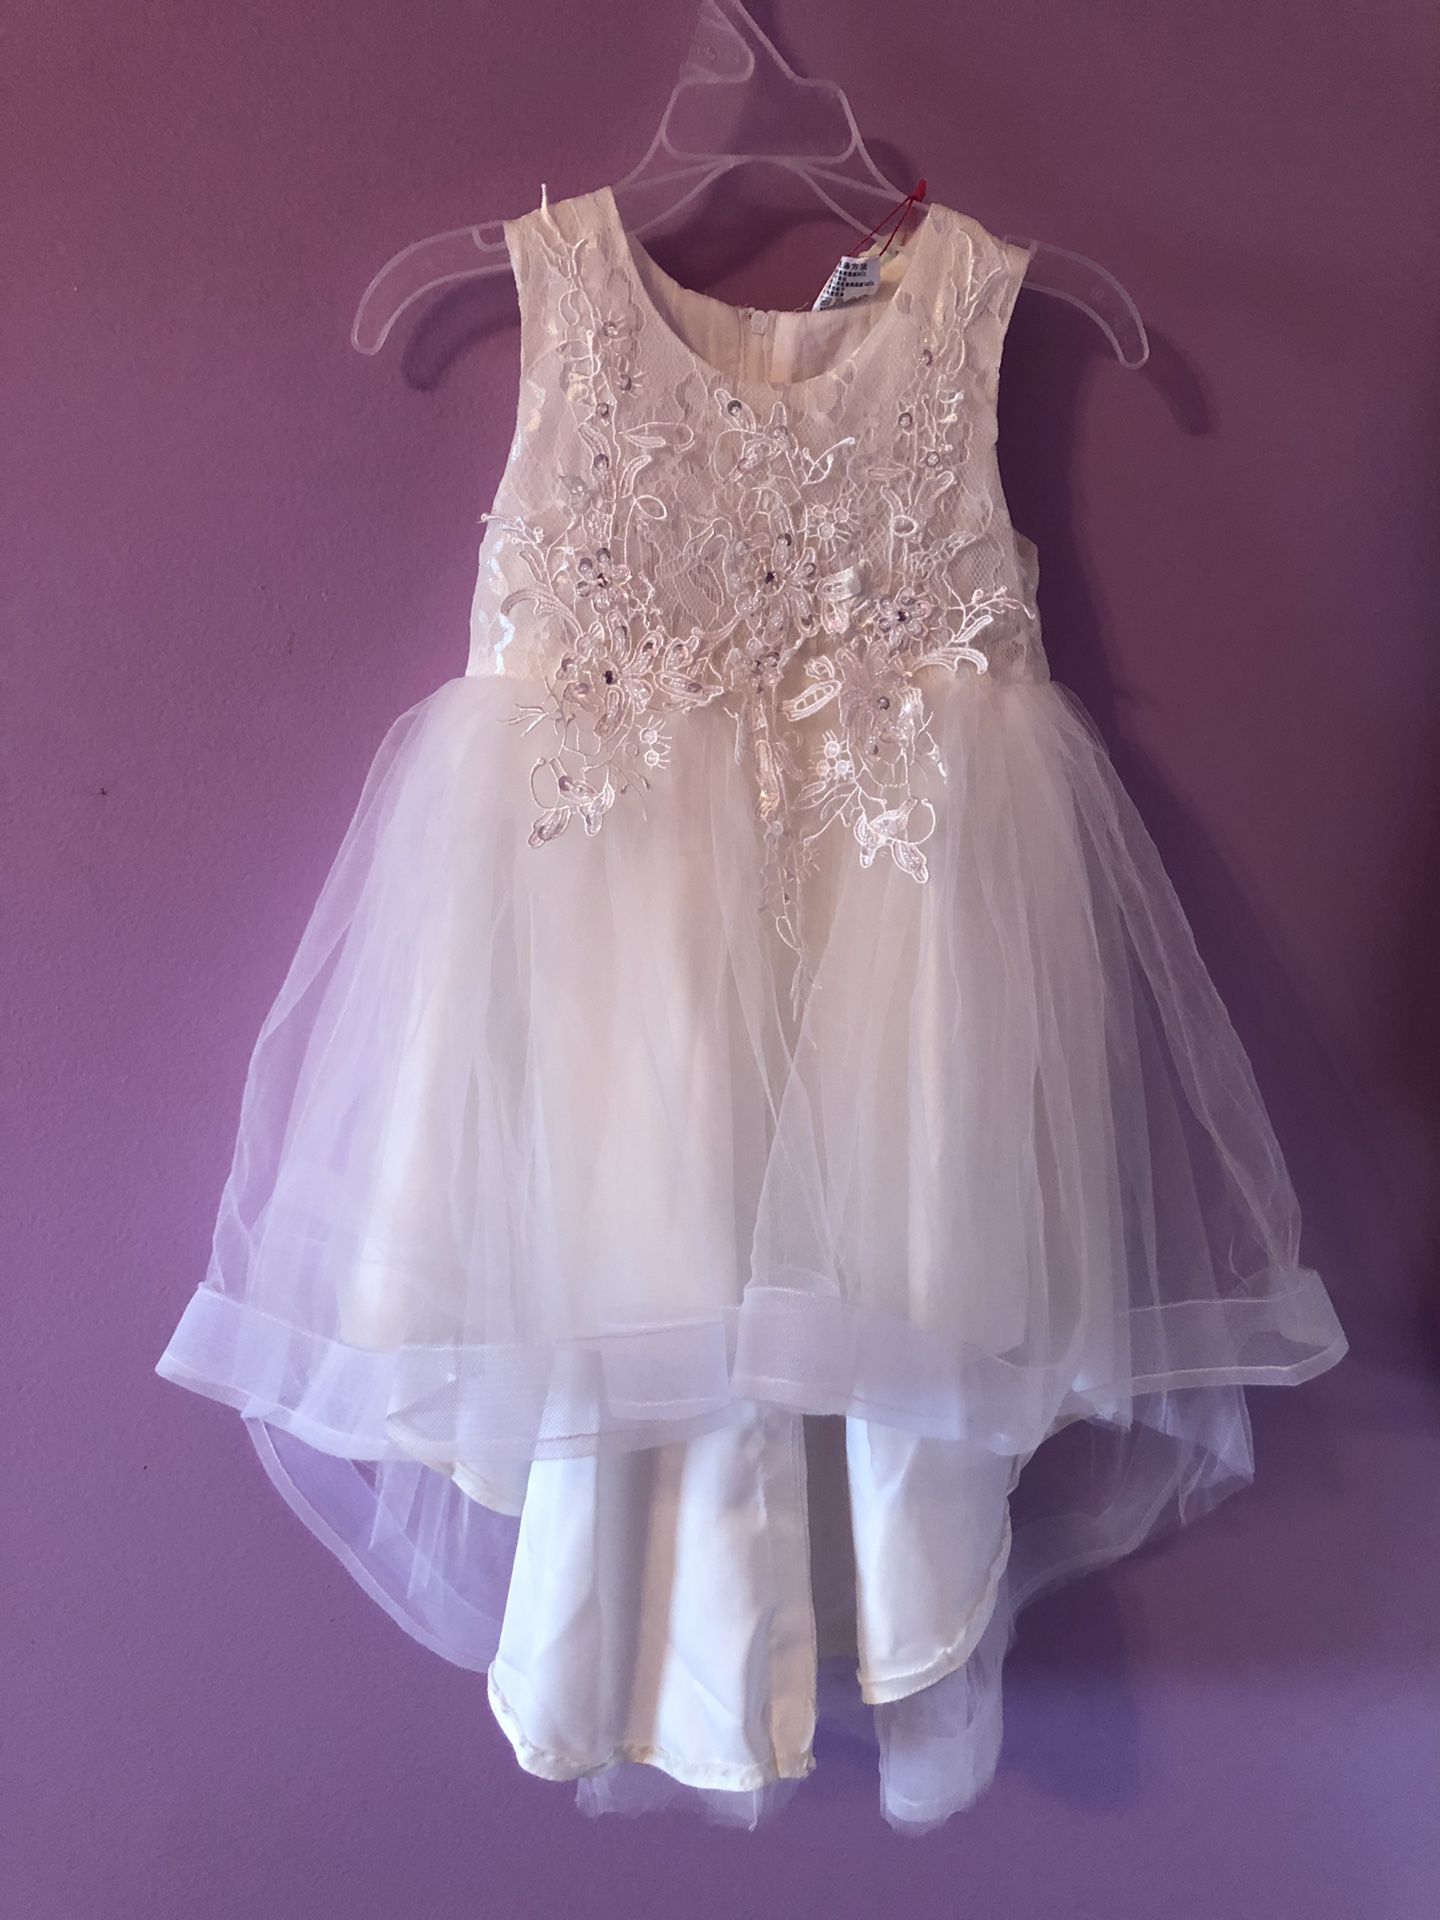 Brand new - with tags - flower girl dresses - size 4 and size 6